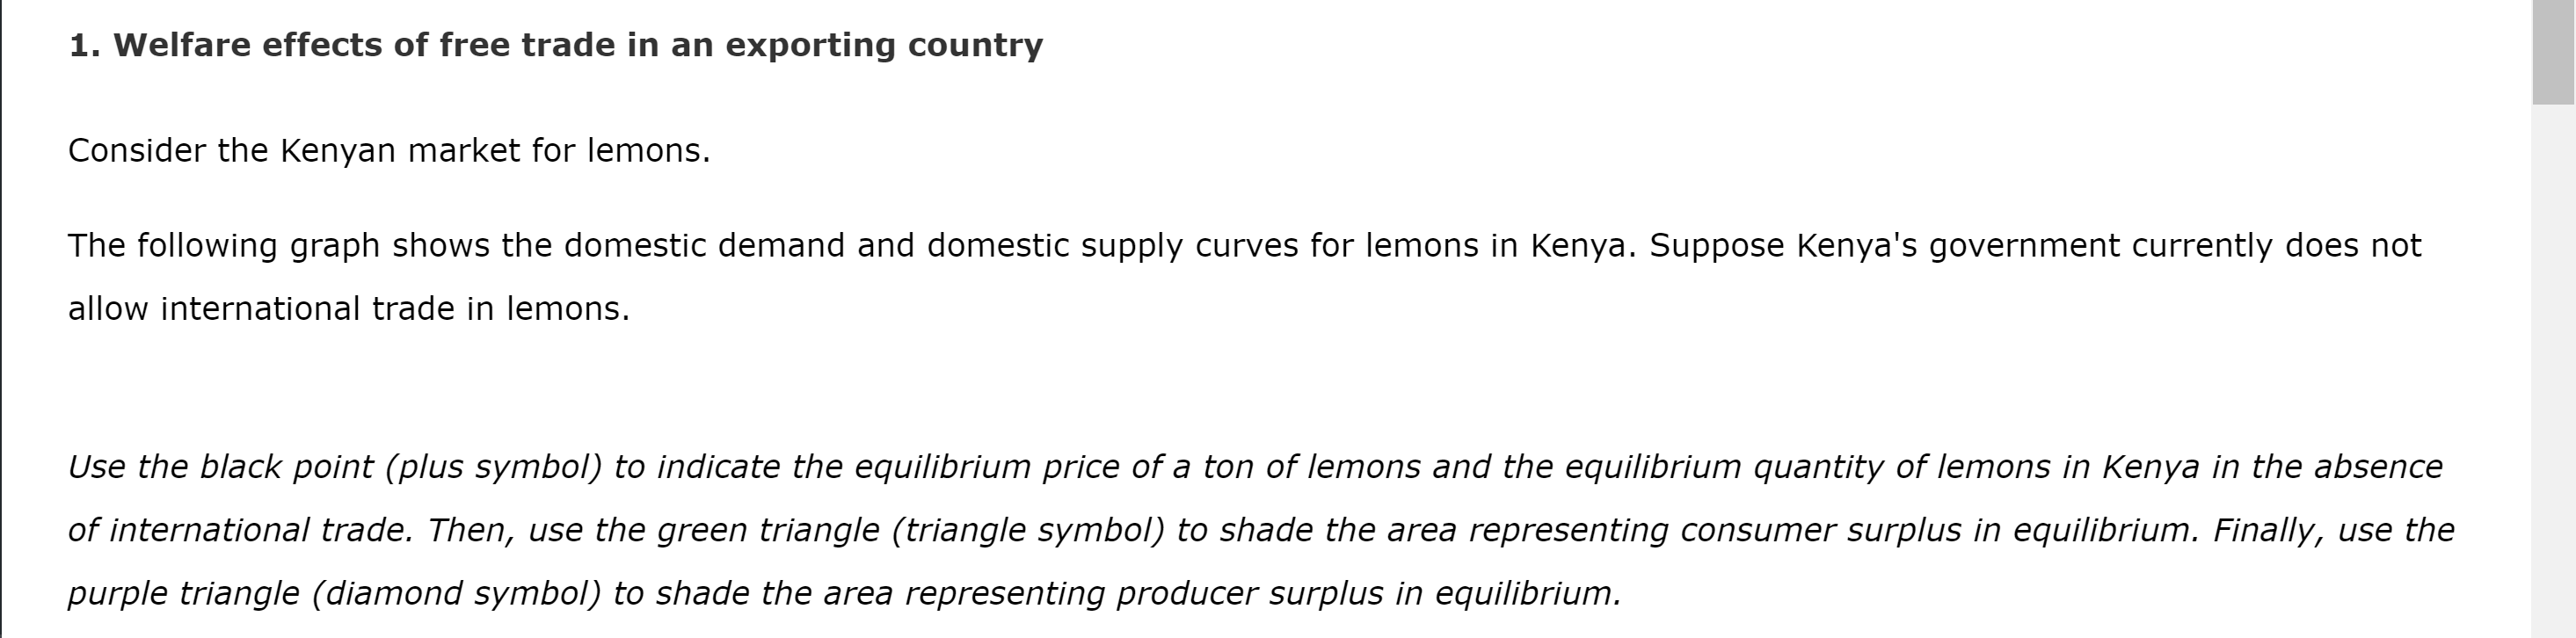 1. welfare effects of free trade in an exporting country consider the kenyan market for lemons. the following graph shows the